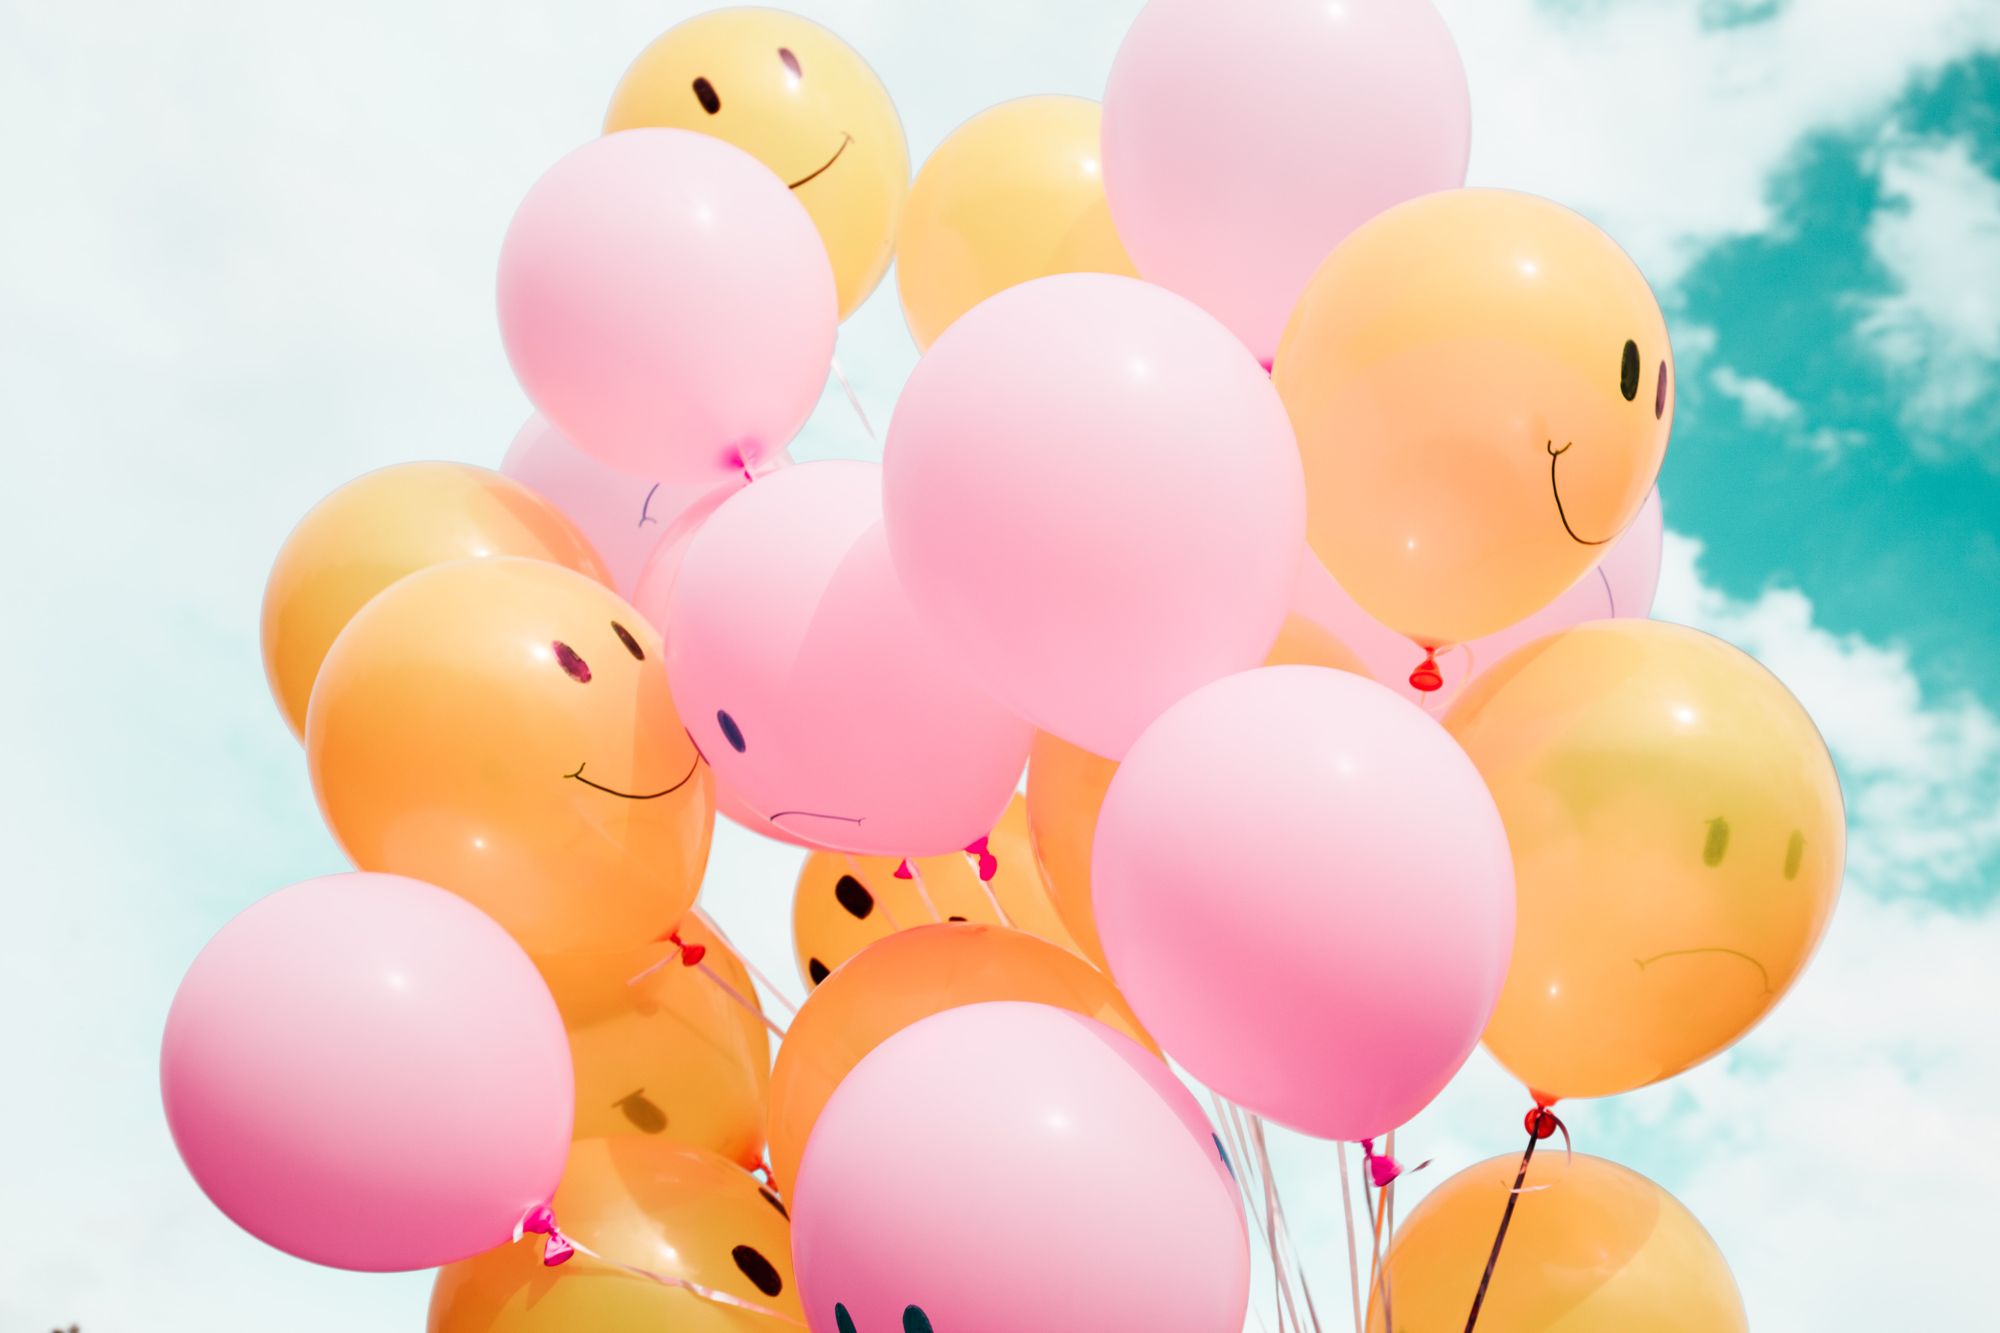 Smile balloons for happier life